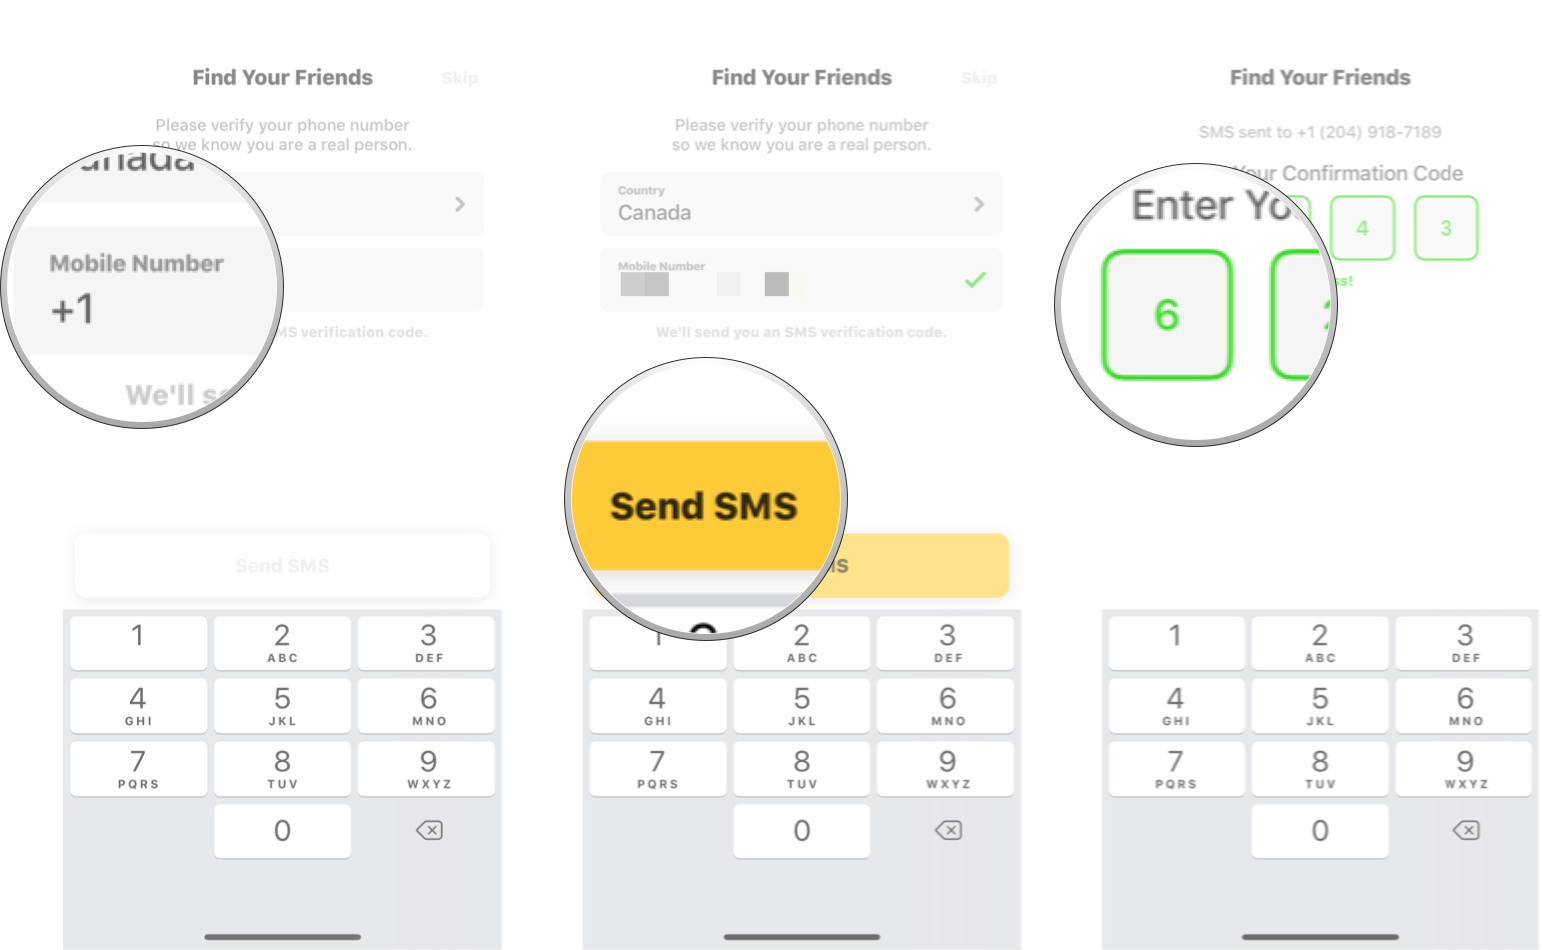 Enter your phone number, tap send sms, and then enter the confirmation code. 